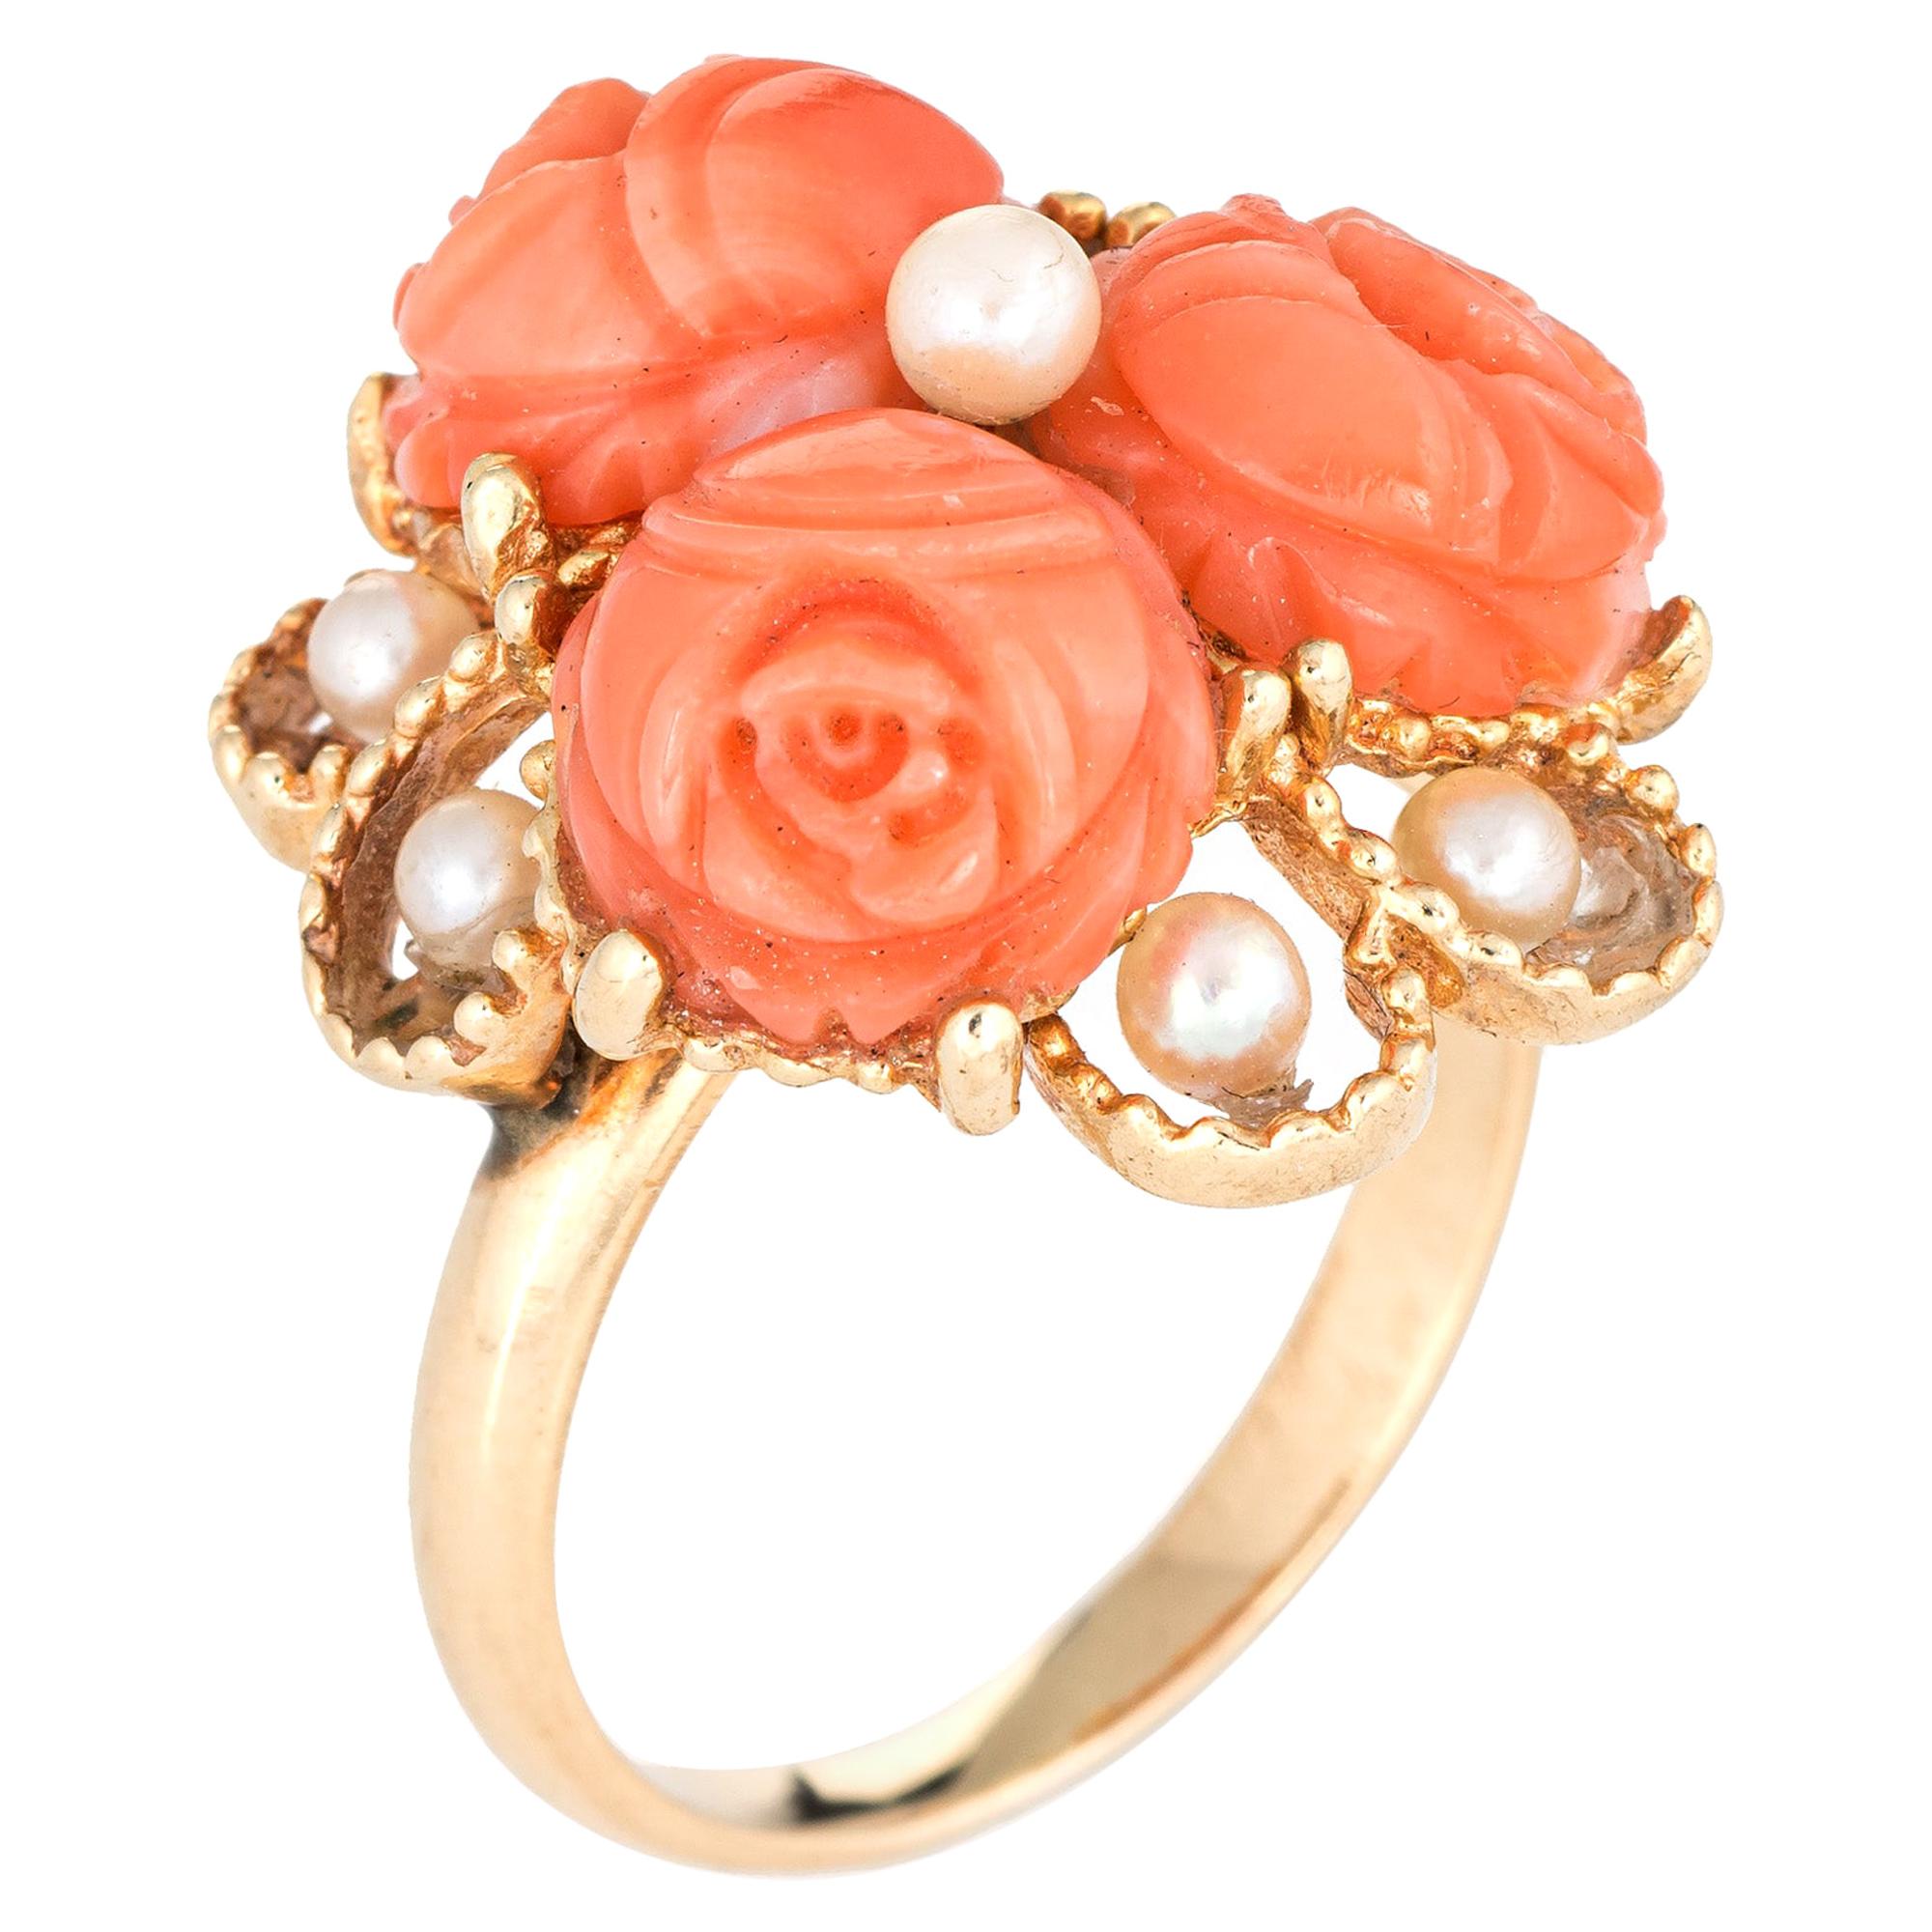 Carved Coral Flower Ring Pearl 14 Karat Gold Cluster Jewelry Estate Cocktail